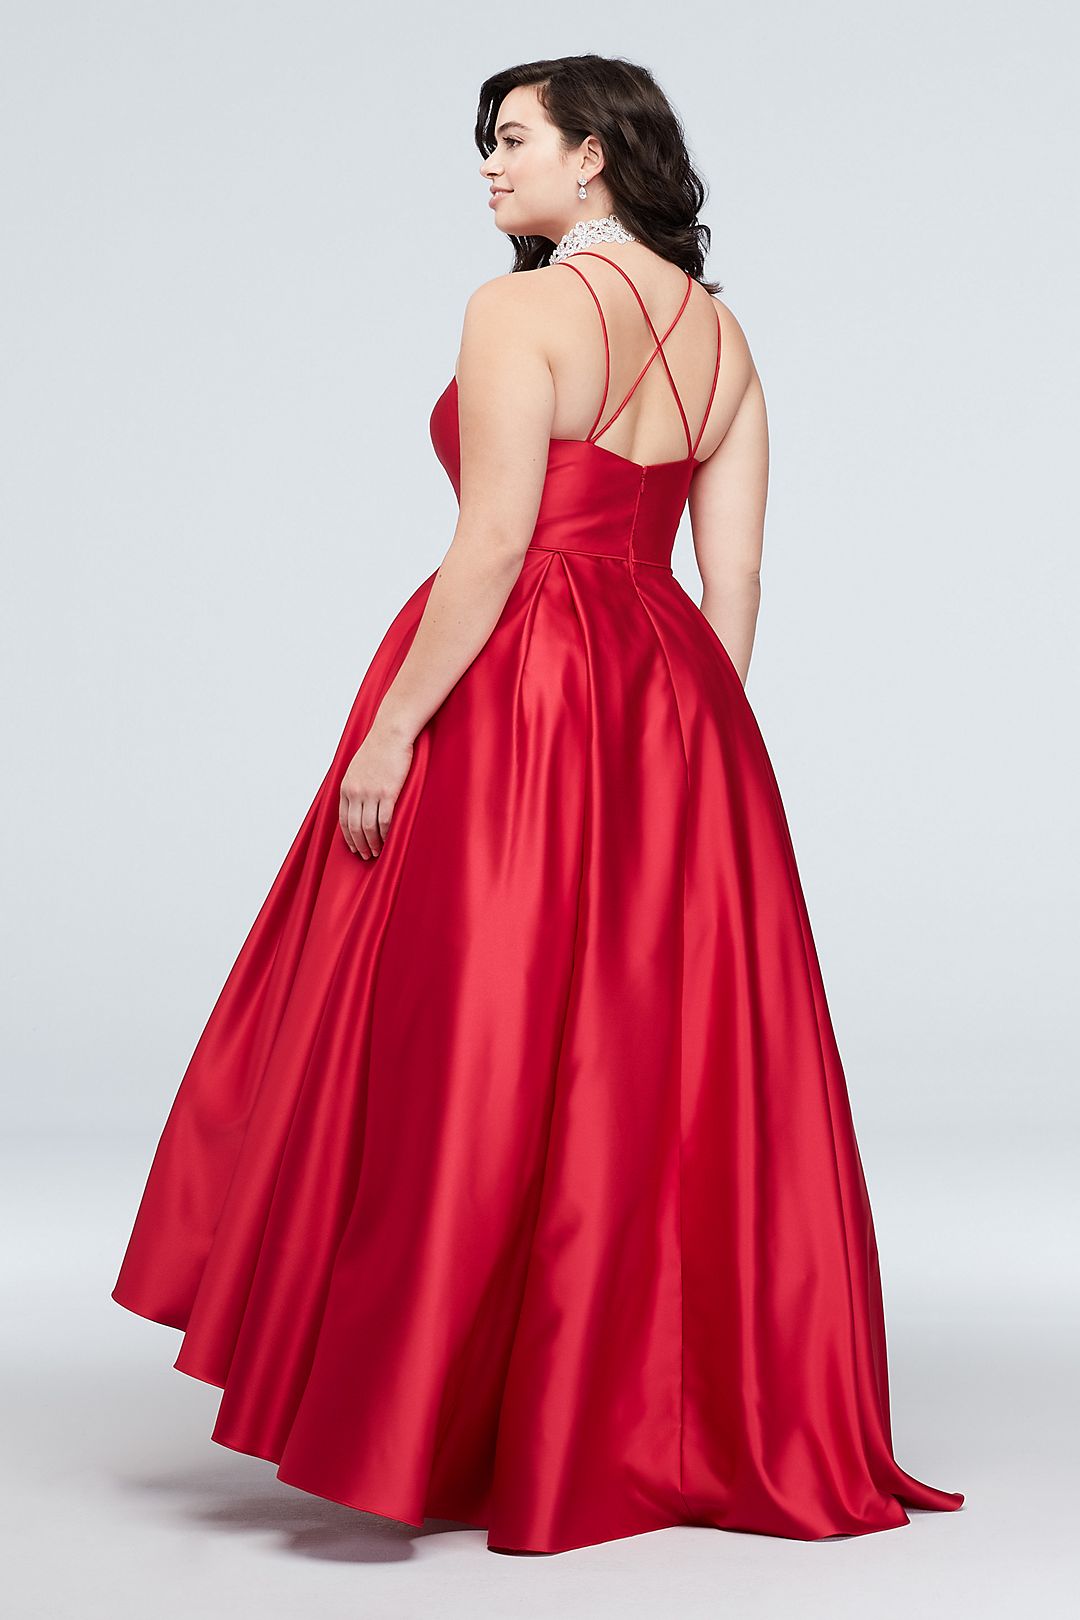 Double Skinny Strap Satin Ball Gown with Pockets Image 2